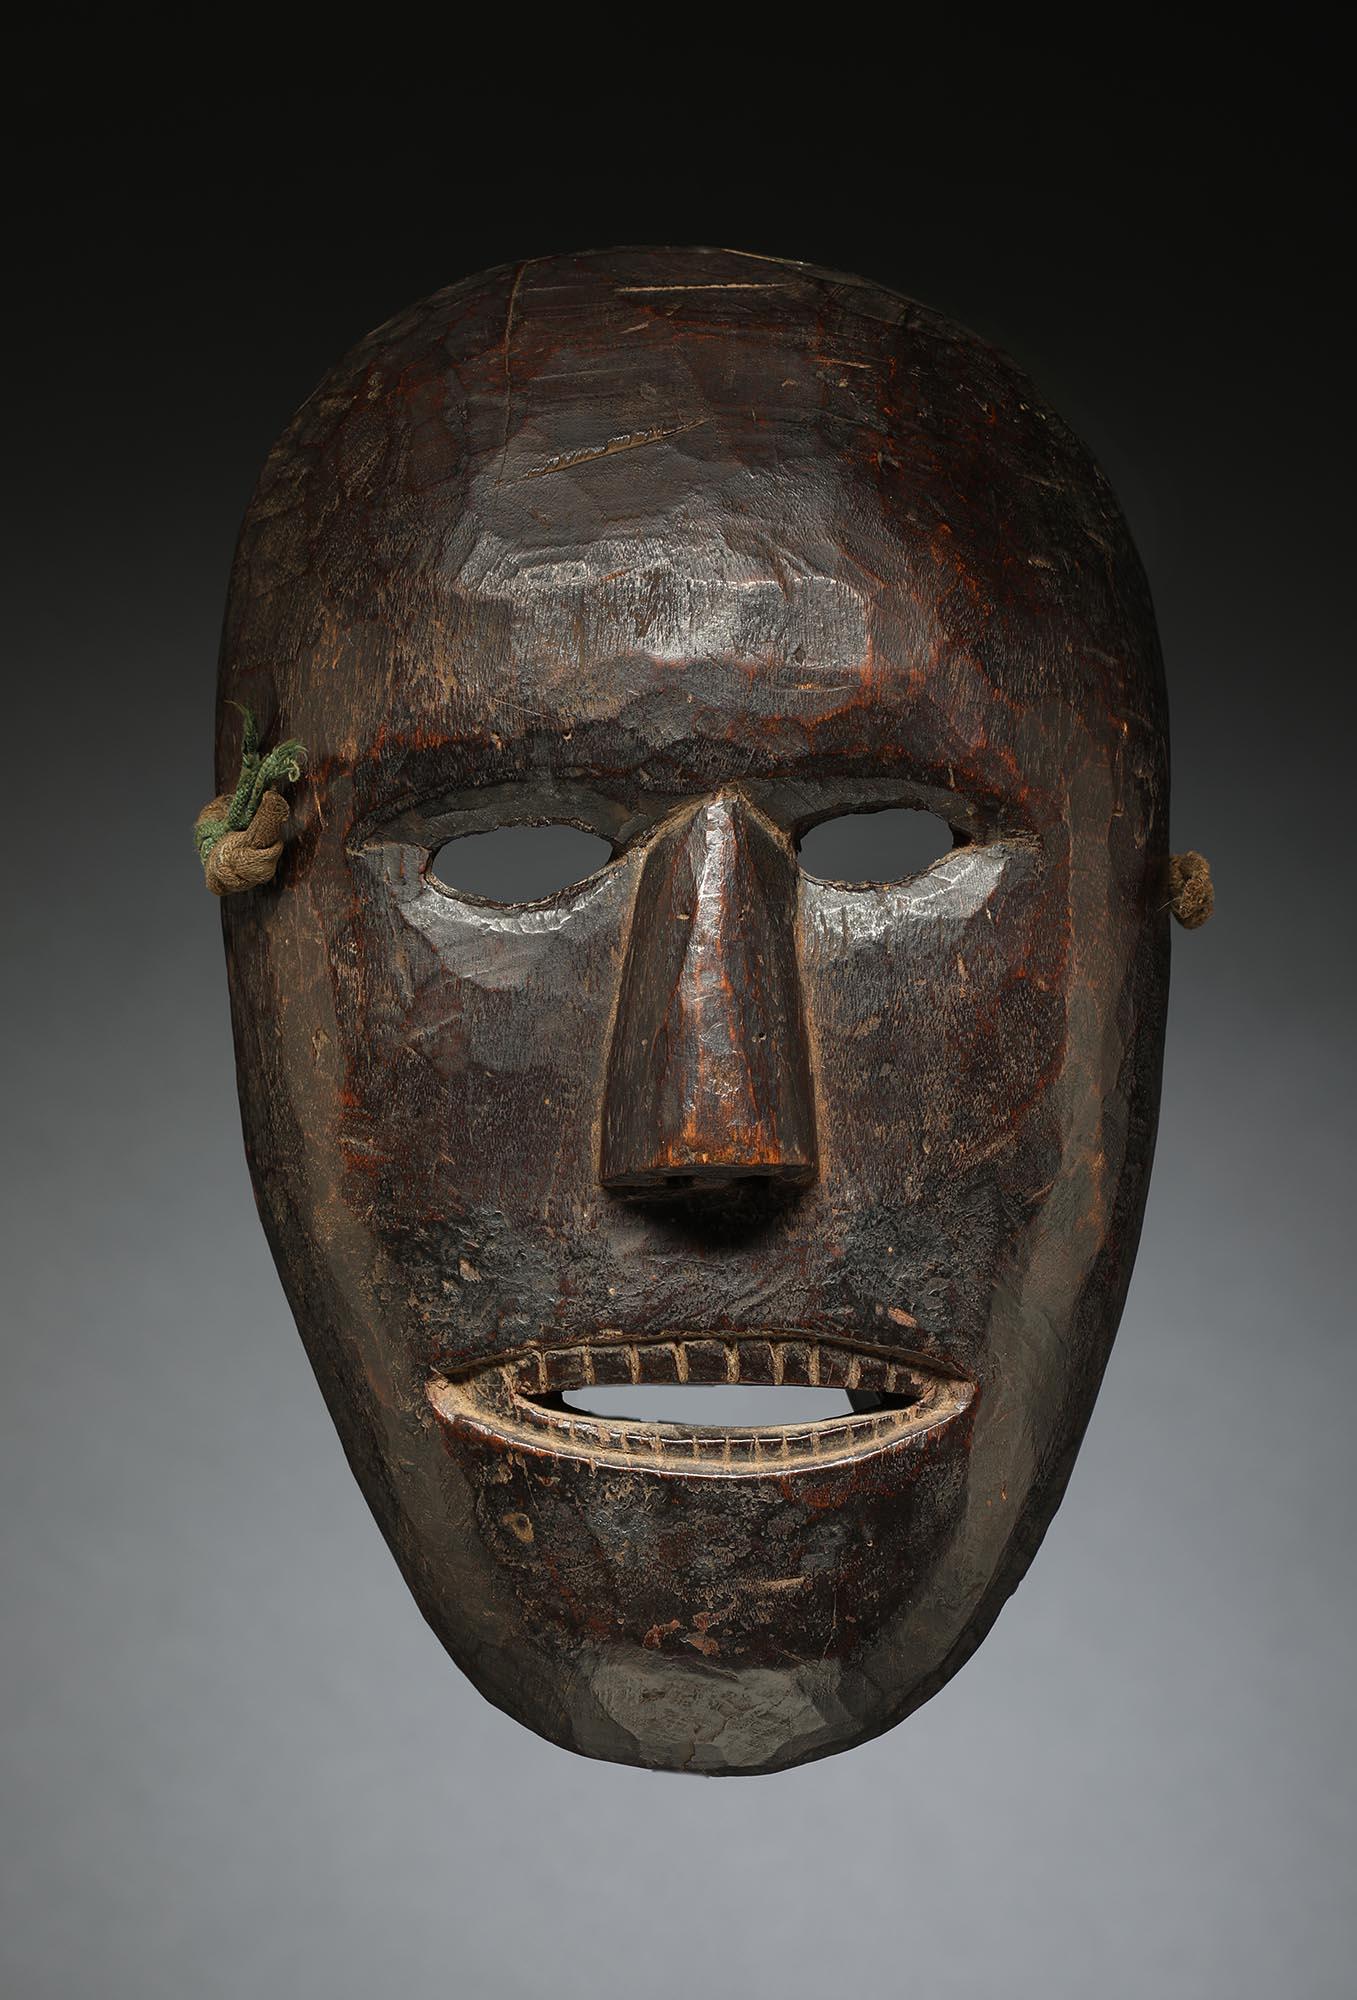 Nepalese Nepal Dance Mask Oval Face with Open Mouth Teeth, Late 19th-Early 20th Century